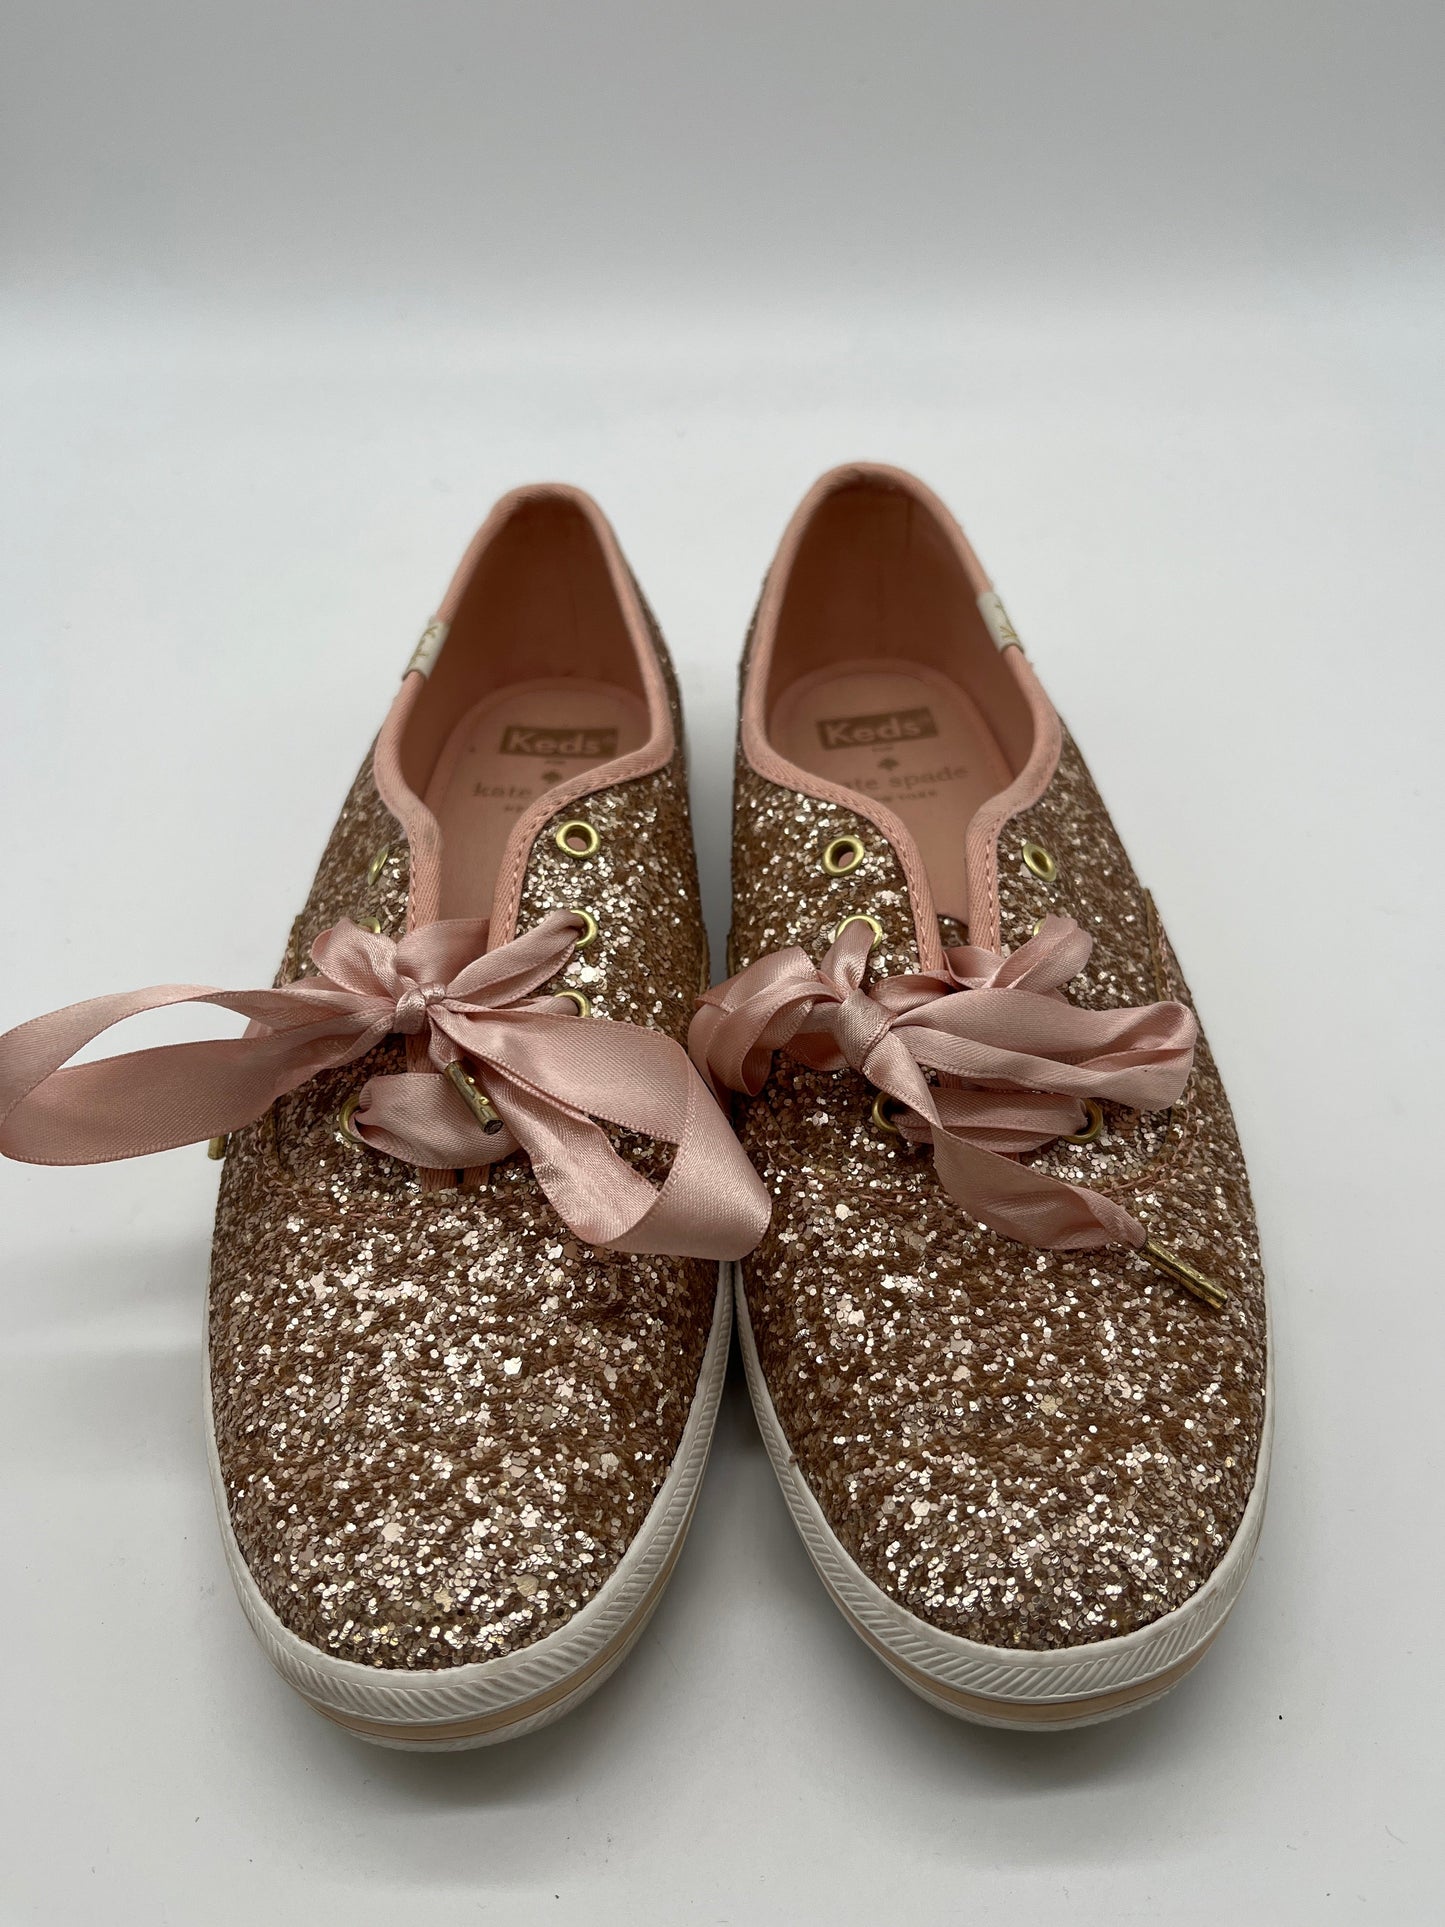 Pink Shoes Sneakers Keds, Size 8